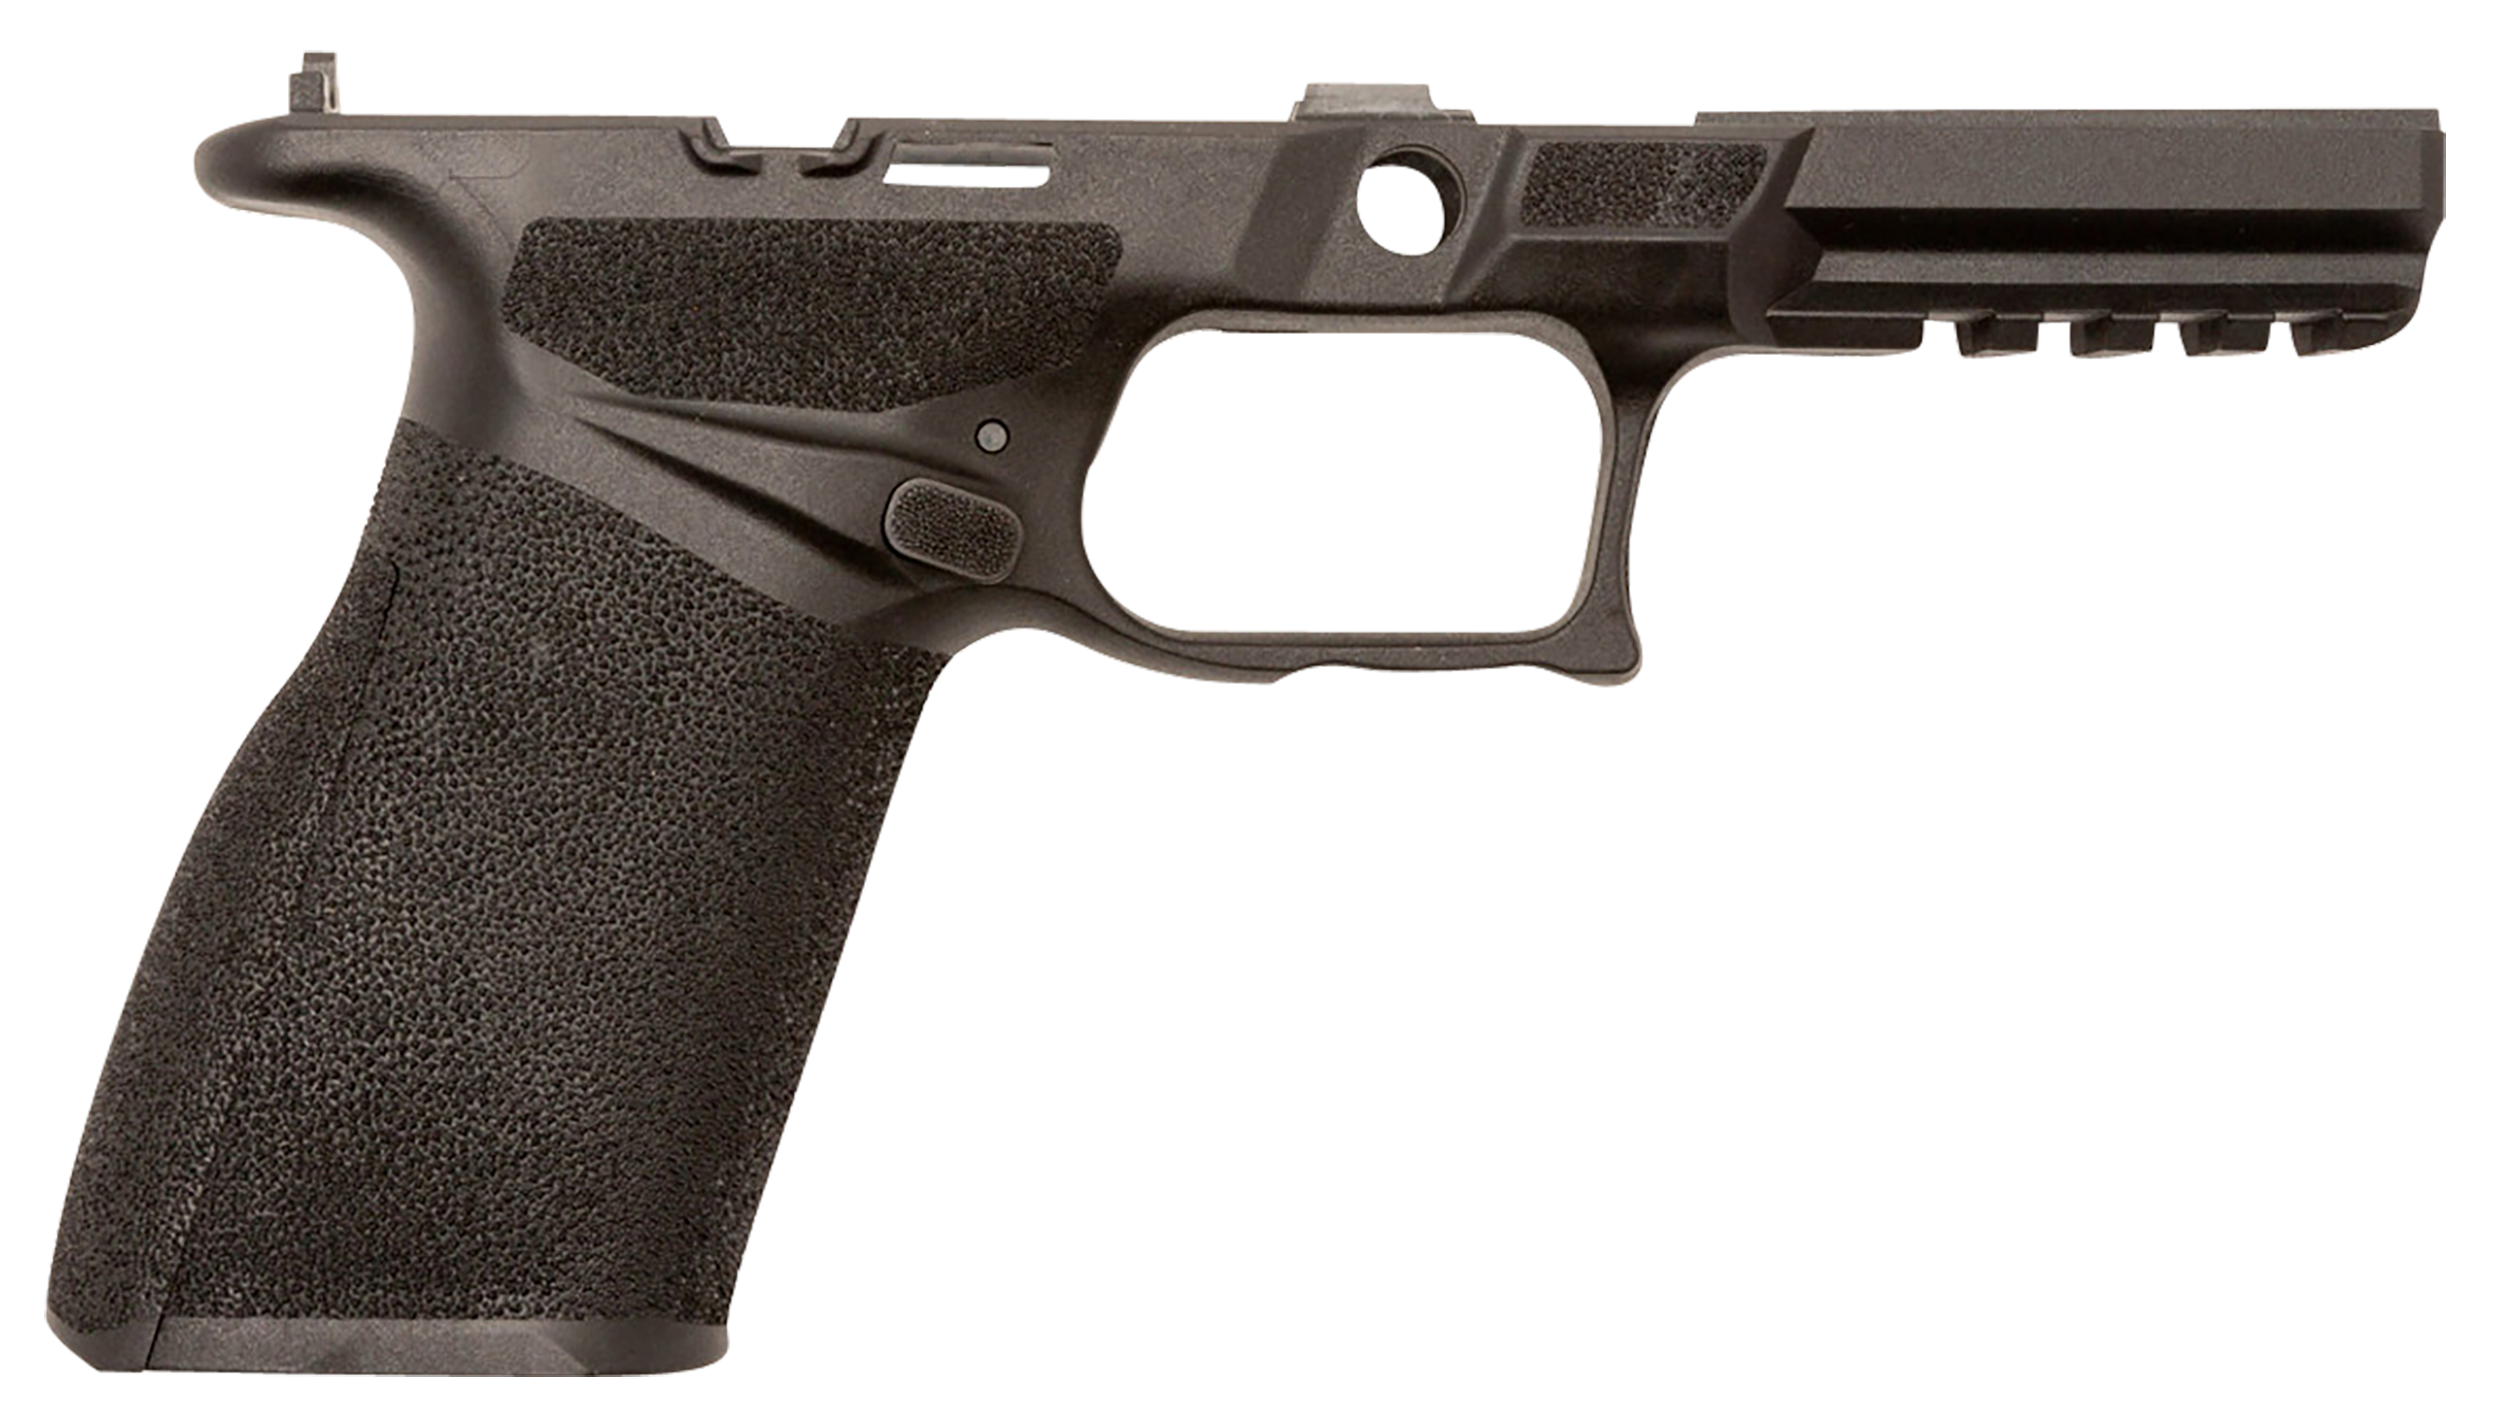 Springfield Armory EC1003HTRET Echelon Grip Module Large, Aggressive Texture, Black Polymer, Ambi Mag Release, Includes 3 Interchangeable Backstraps